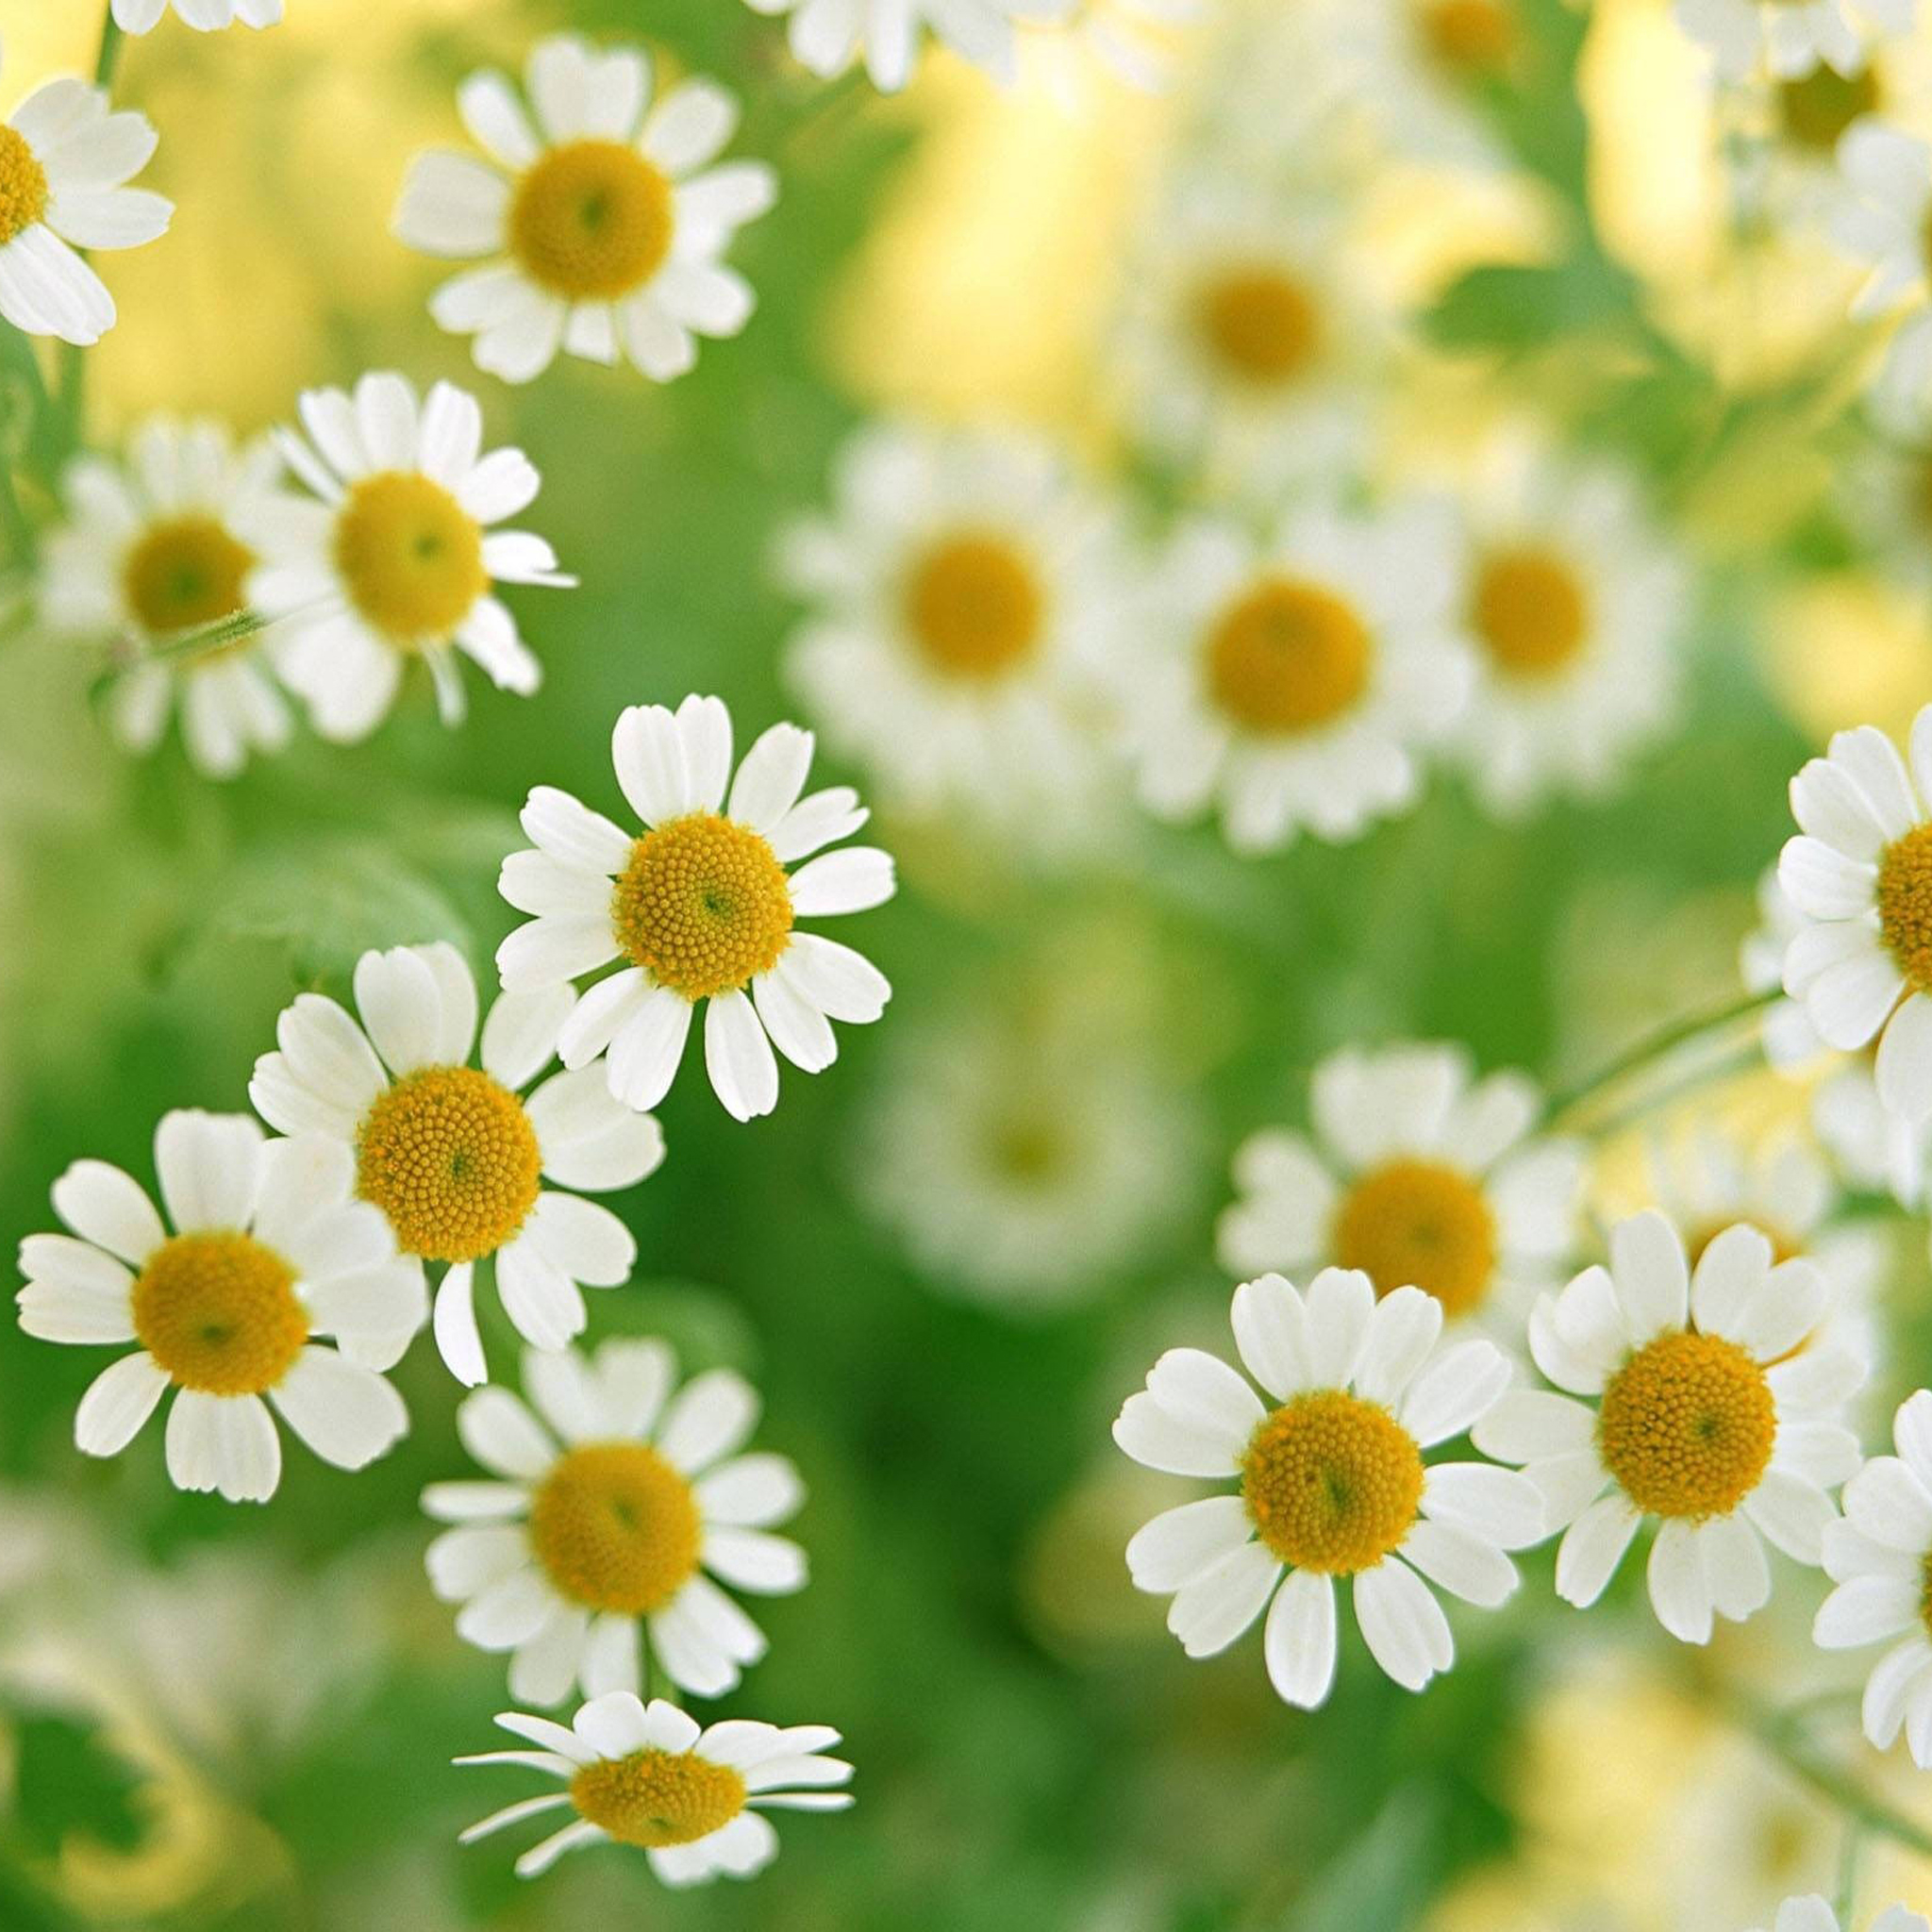 daisy iPad Wallpapers | iPhone Wallpapers, iPad wallpapers One ...